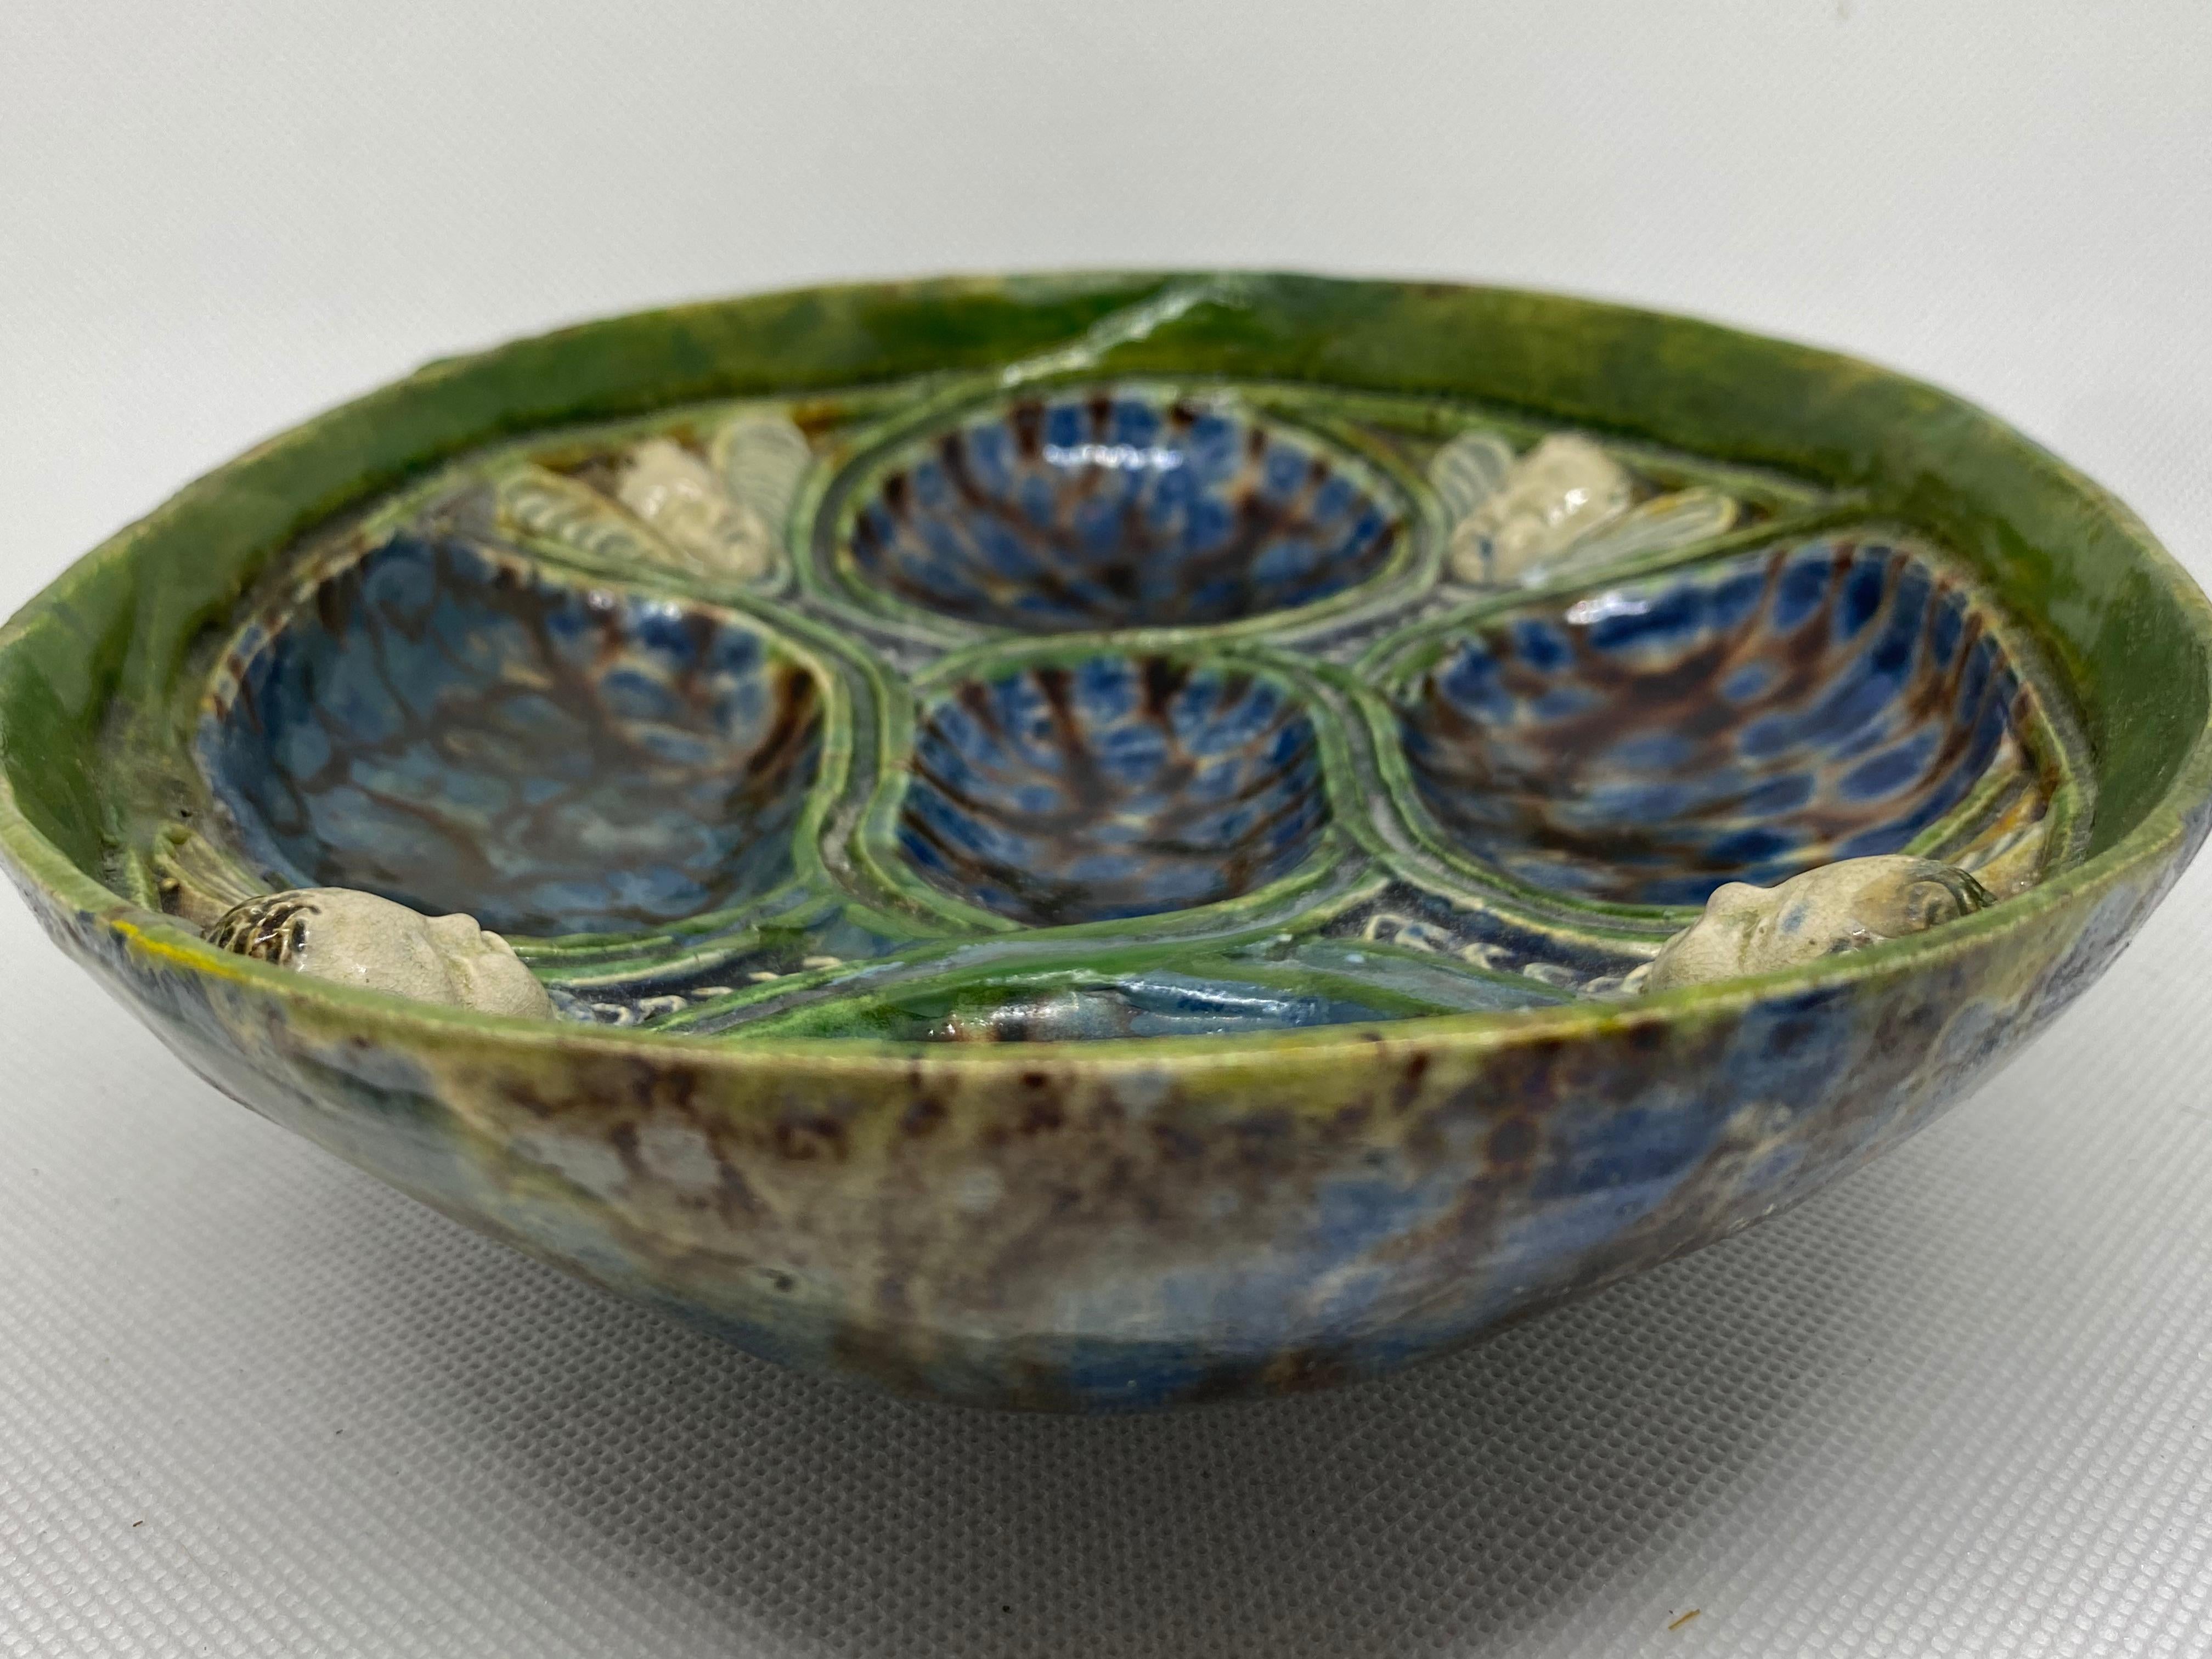 Earthenware Oval Dish with Winged Putti, After Bernard Palissy, French, 17th Century For Sale